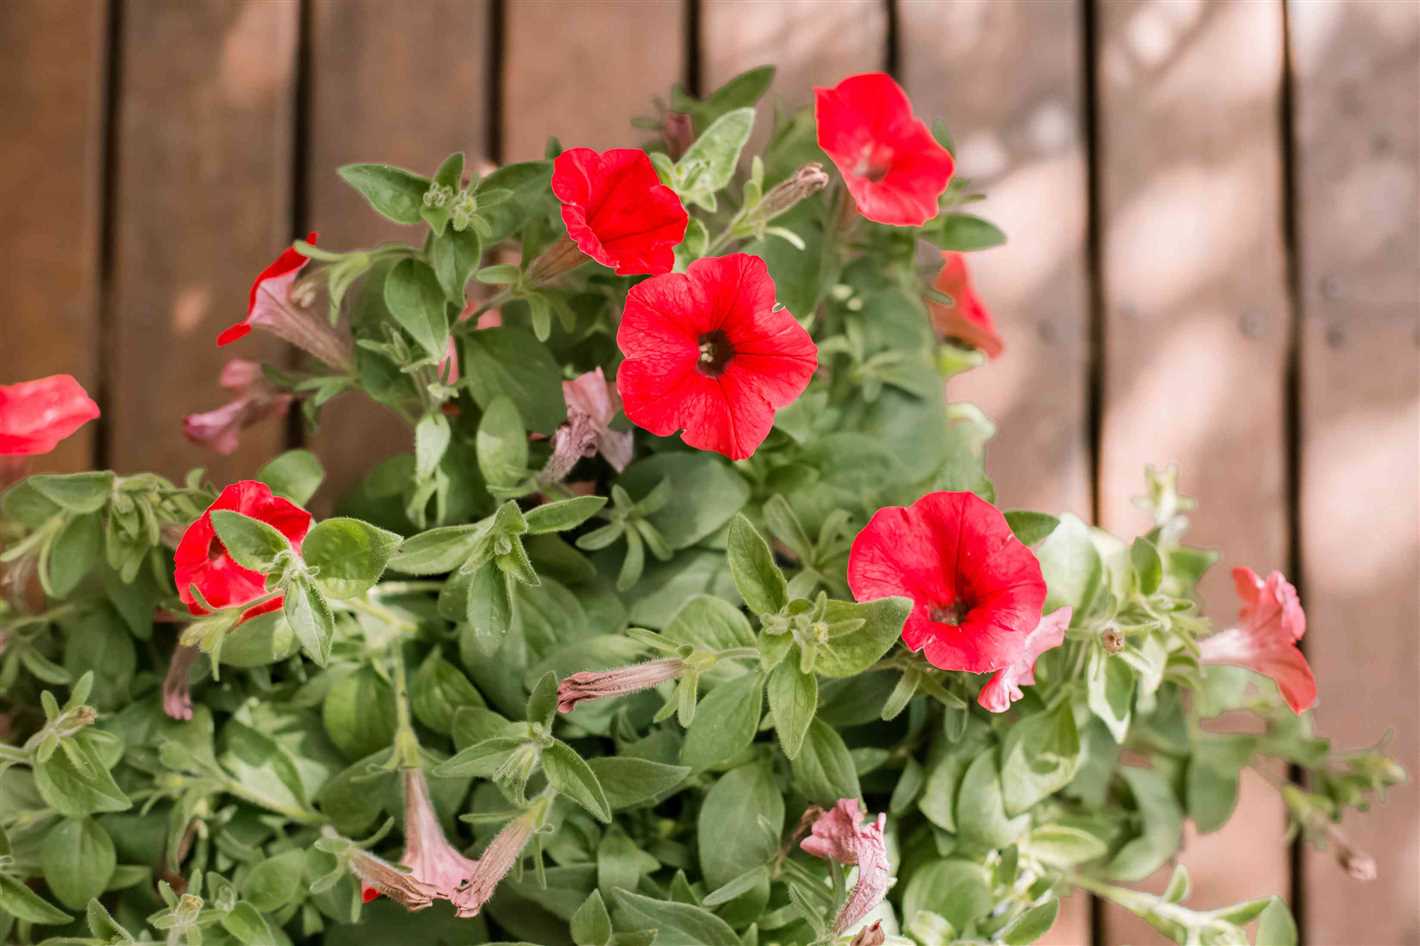 Here's what petunias need to be beautiful - the right fertiliser!